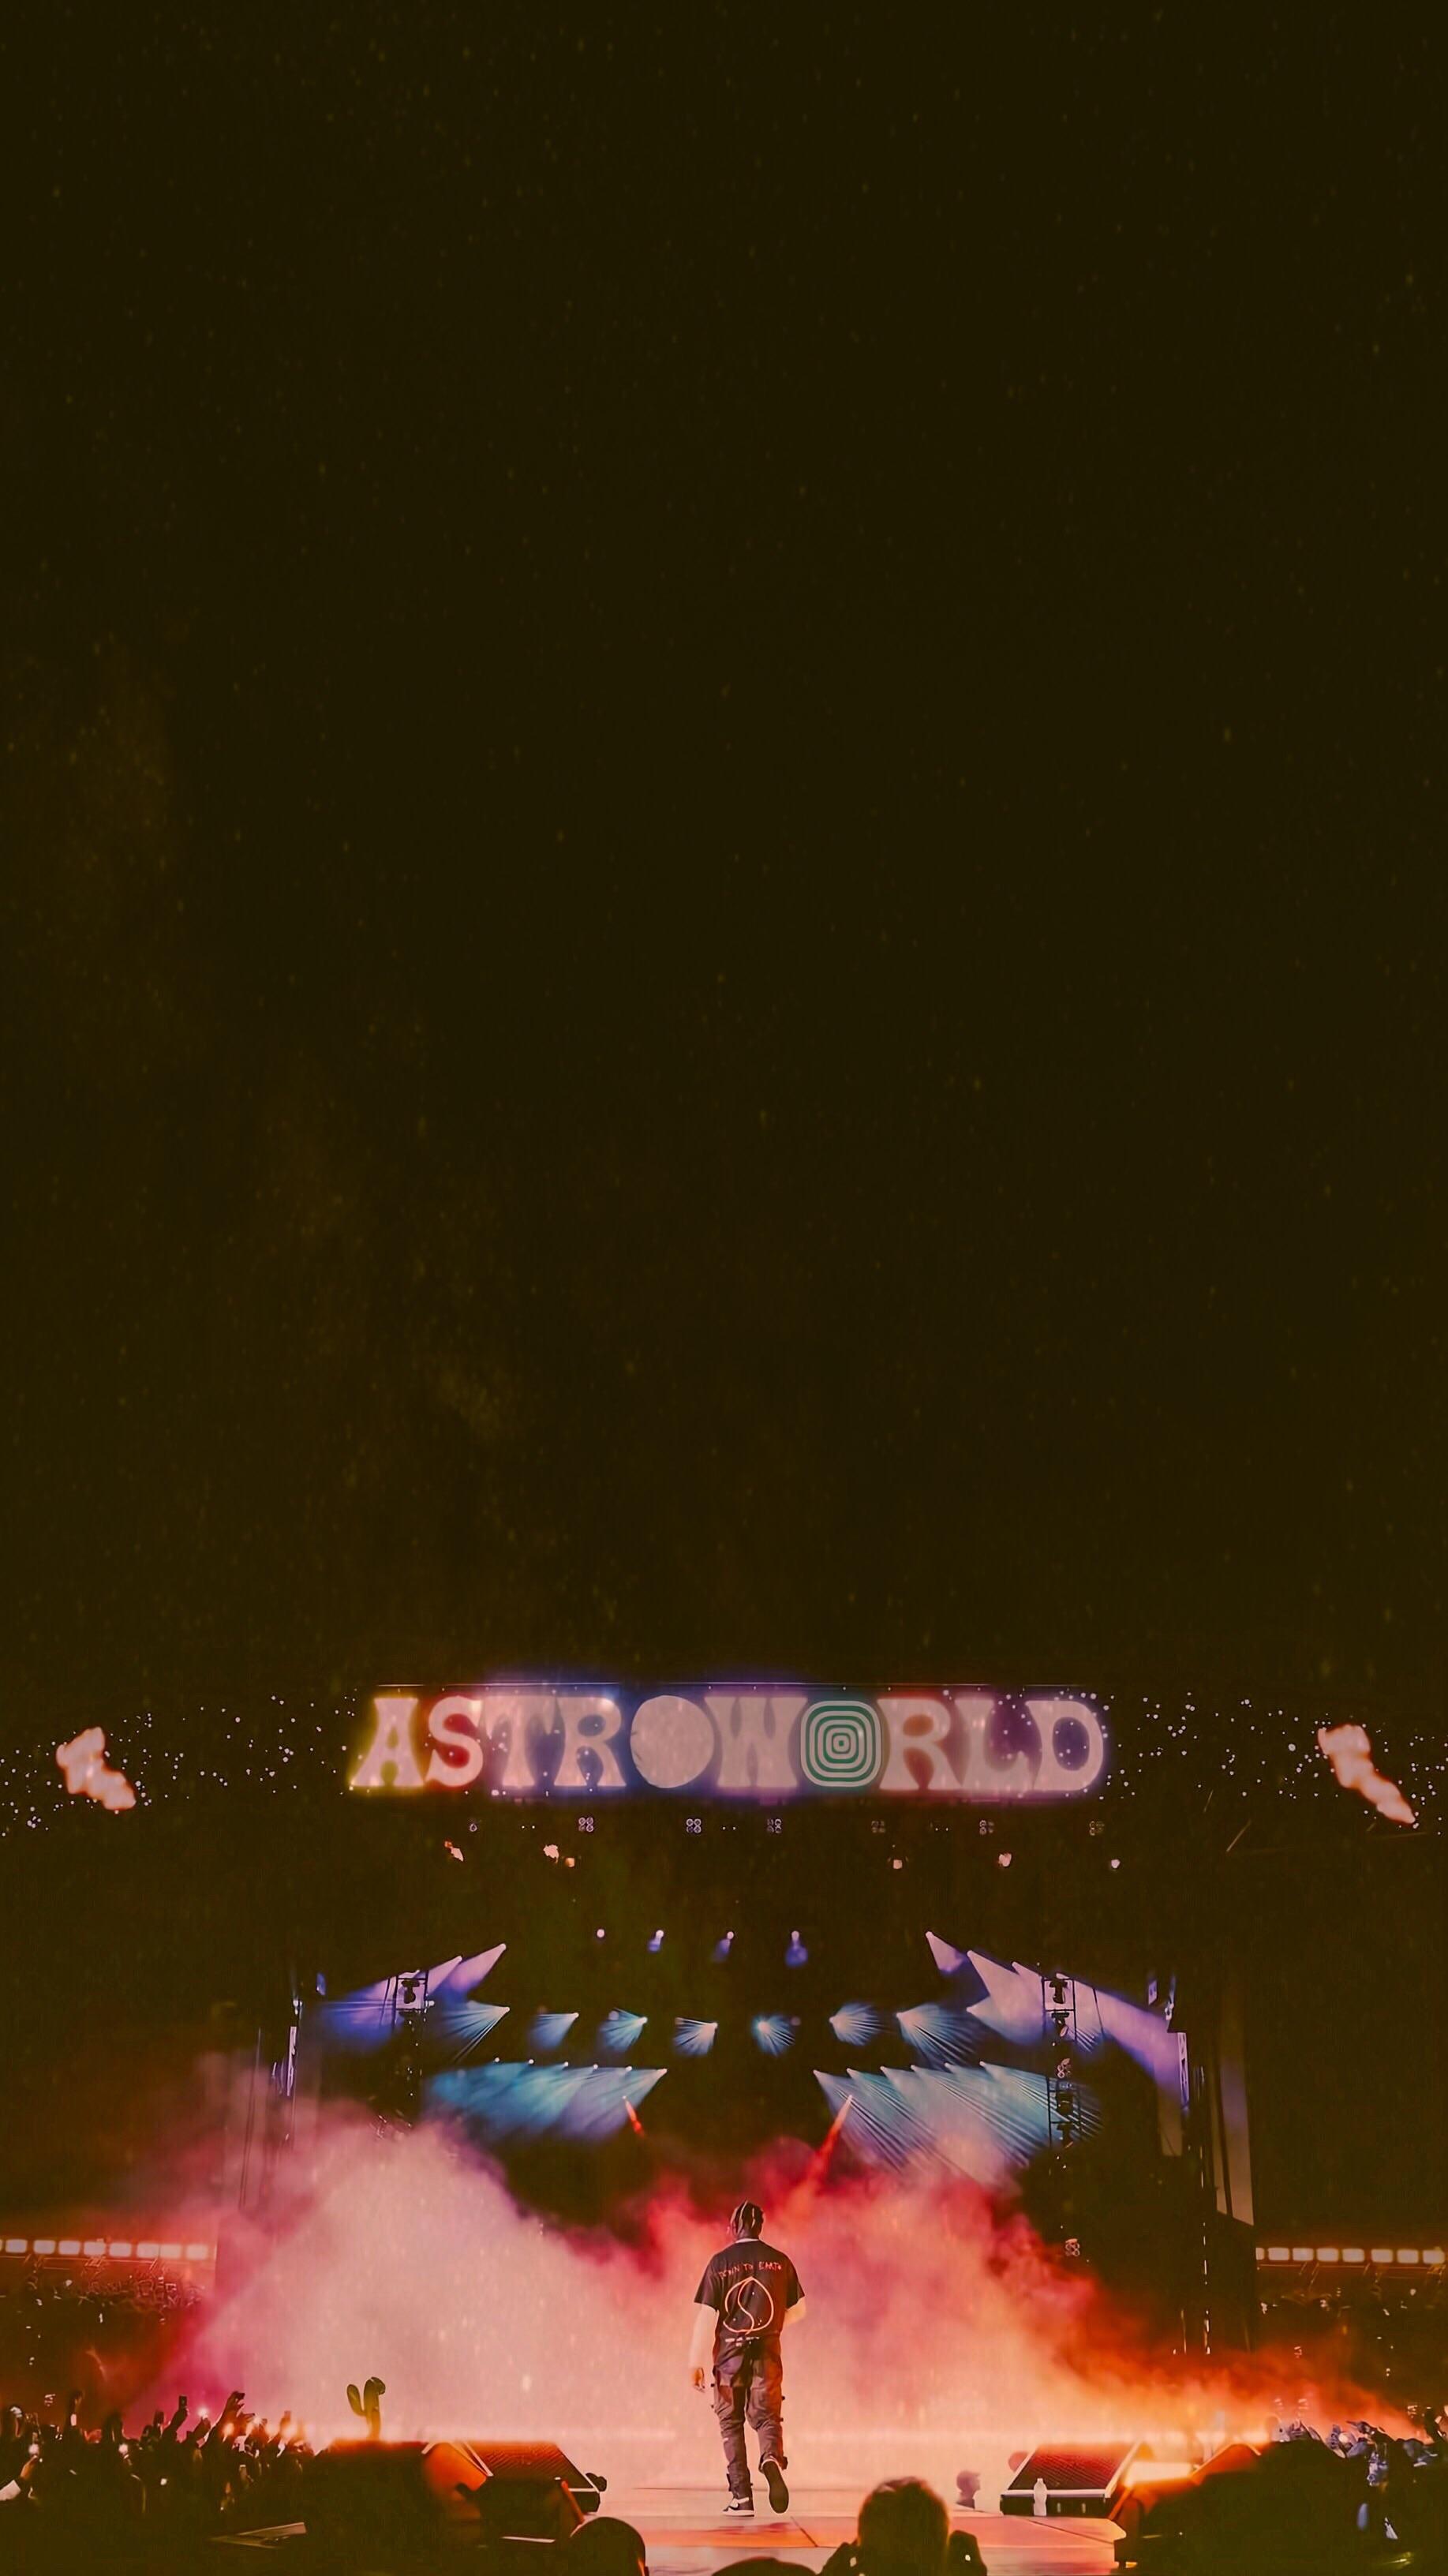 Astroworld wallpaper thought you guys would like